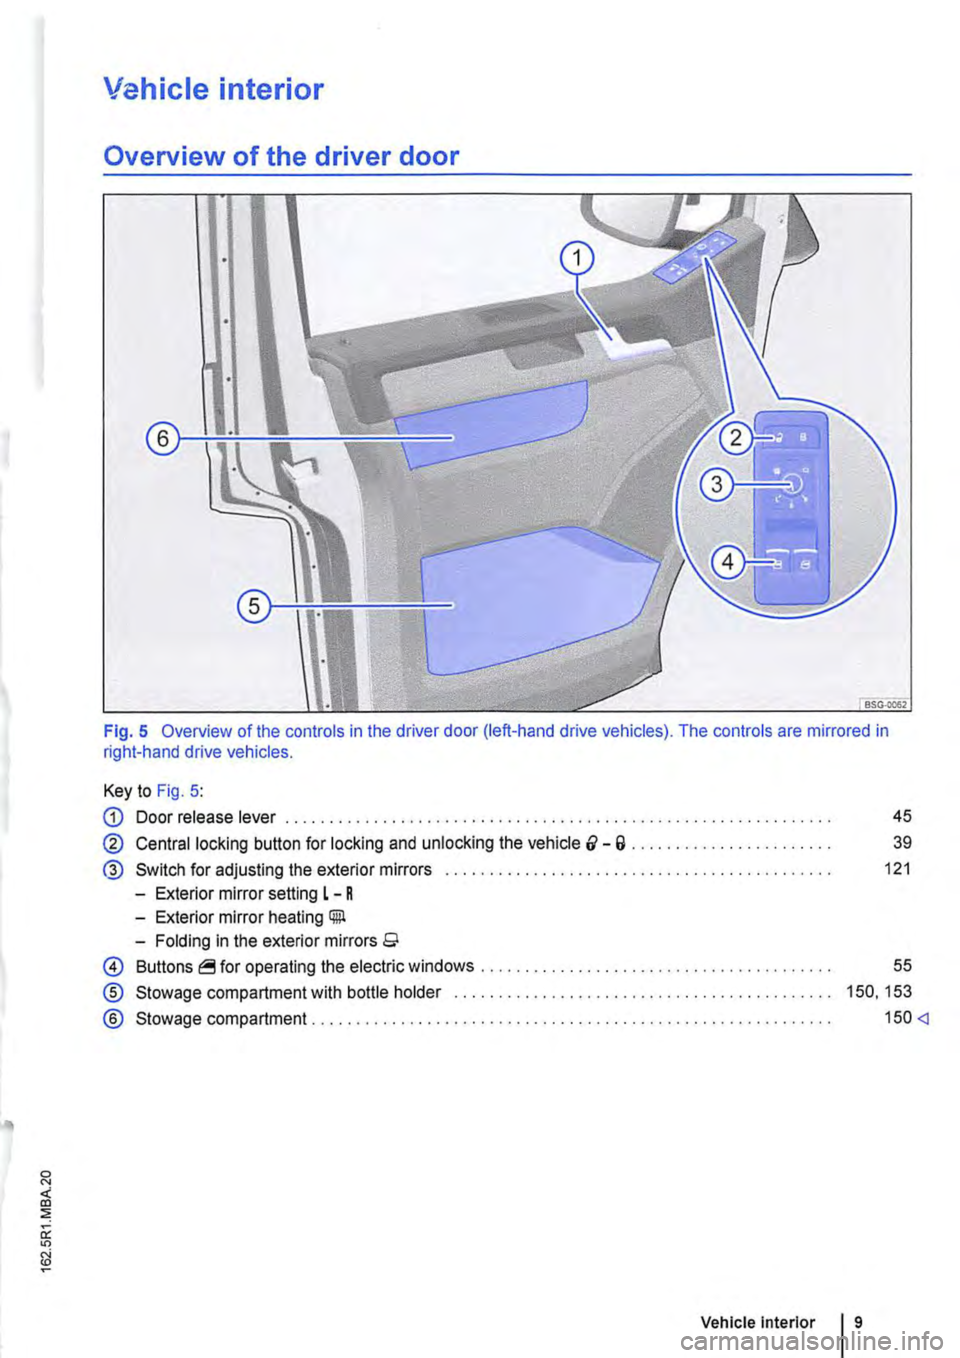 VOLKSWAGEN TRANSPORTER 2018  Owners Manual Vehicle interior 
Overview of the driver door 
Fig. 5 Overview of the controls in the driver door (left-hand drive vehicles). The controls are mirrored in right-hand drive vehicles. 
Key to Fig. 5: 
G